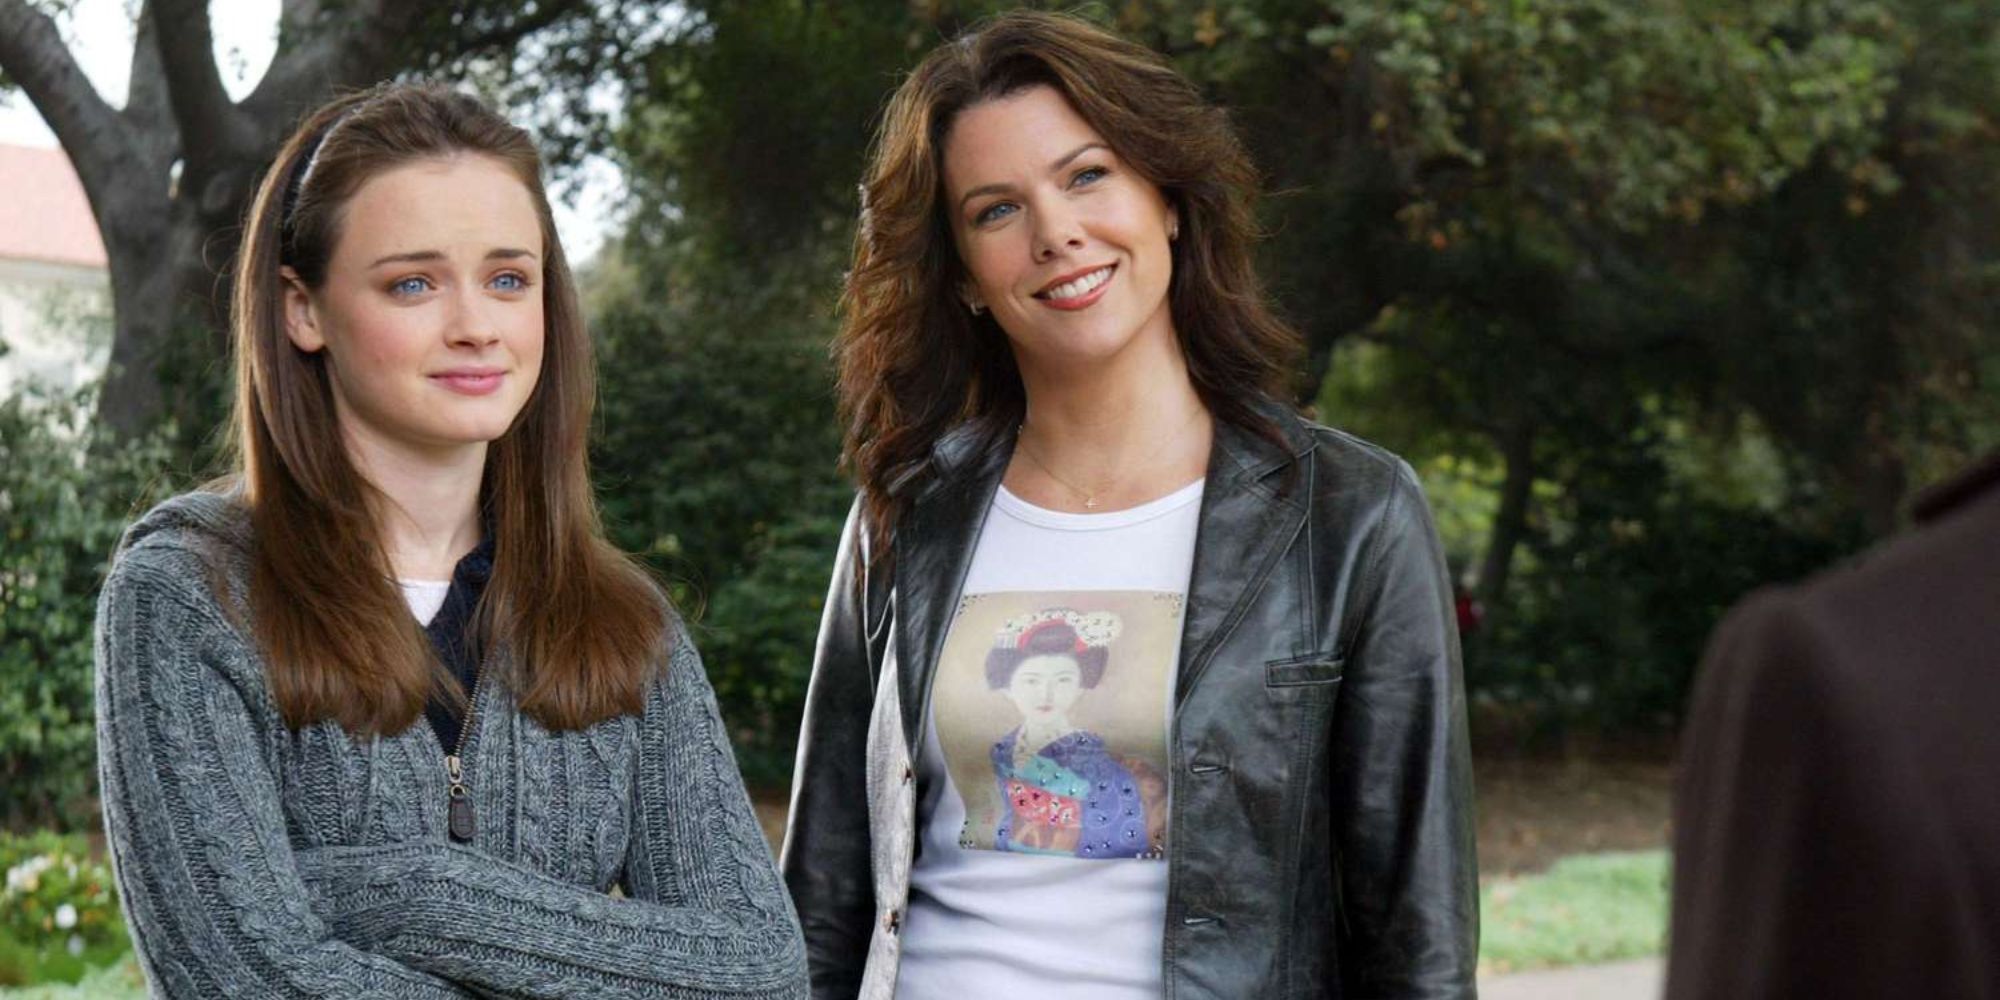 Rory and Lorelai from Gilmore Girls standing together